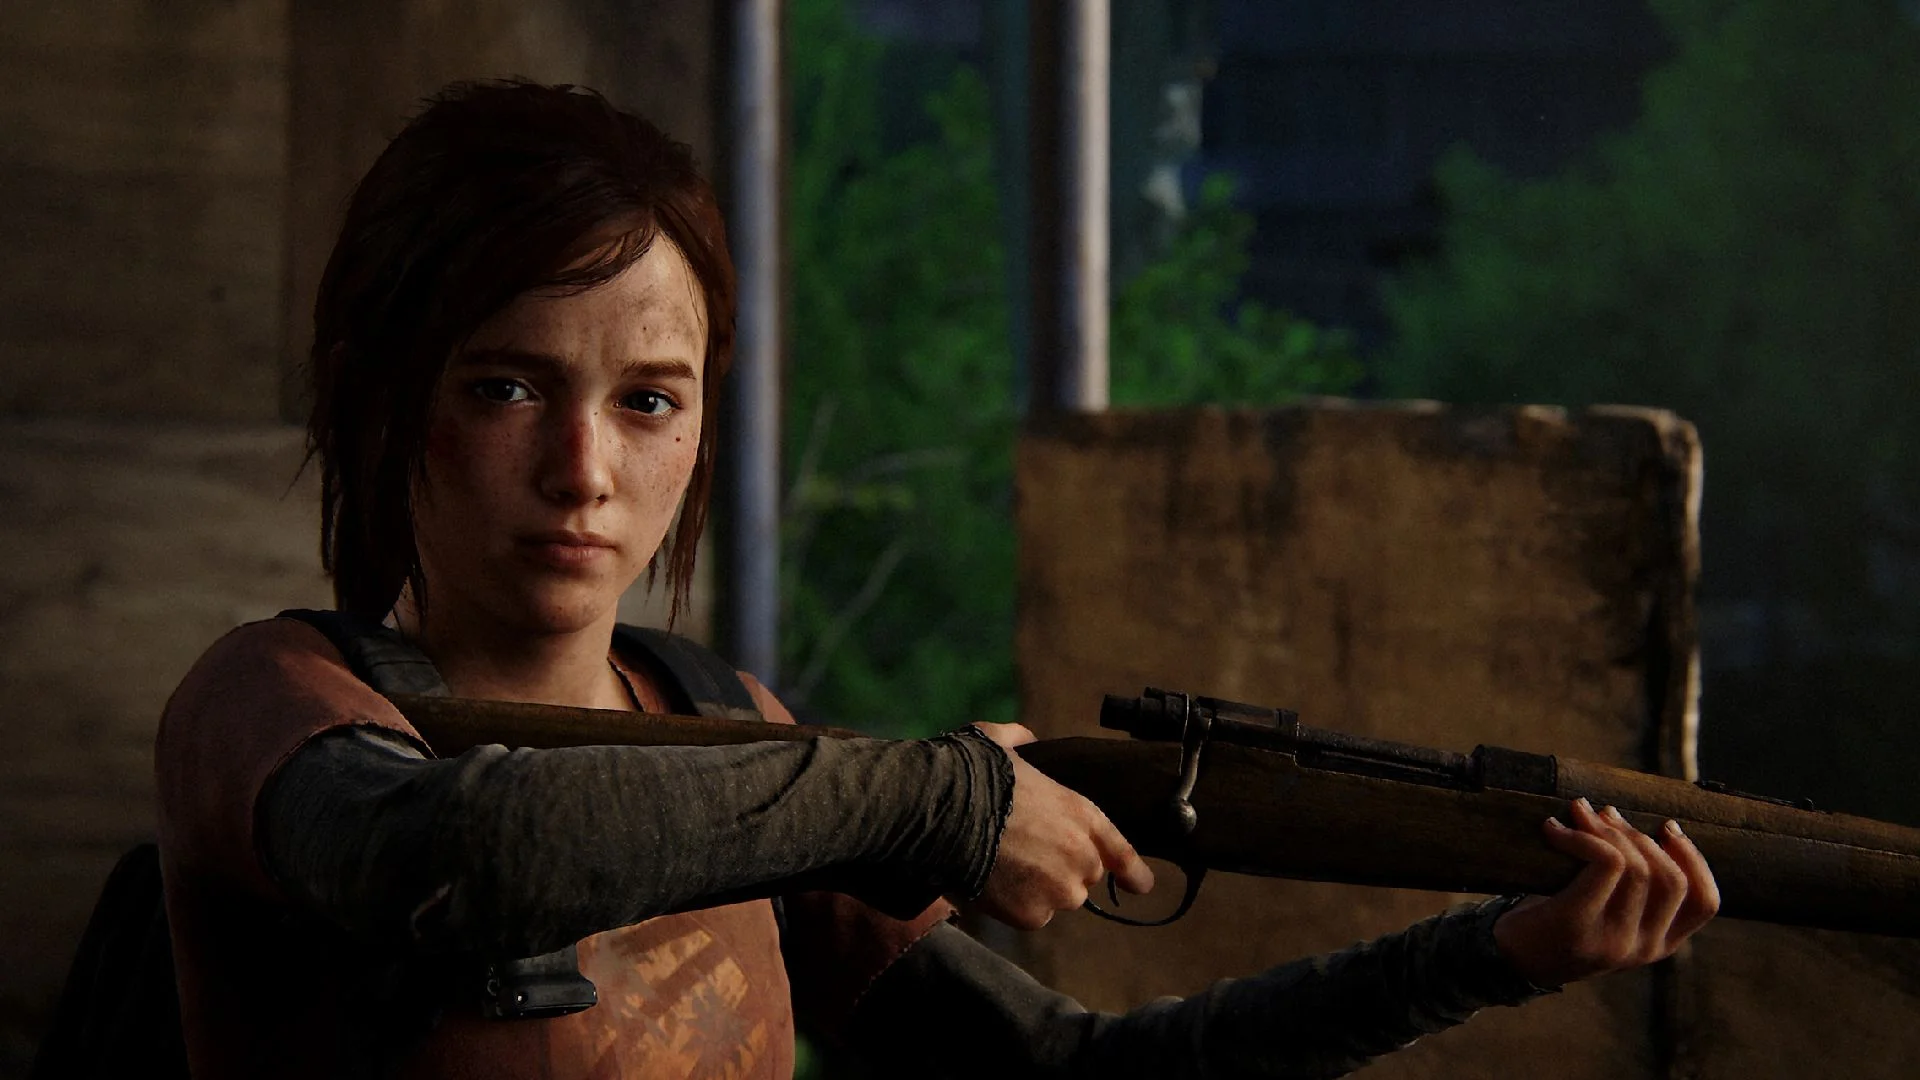 The Last of Us Part 1 PC patch - Patch v1.0.1.7 is now LIVE